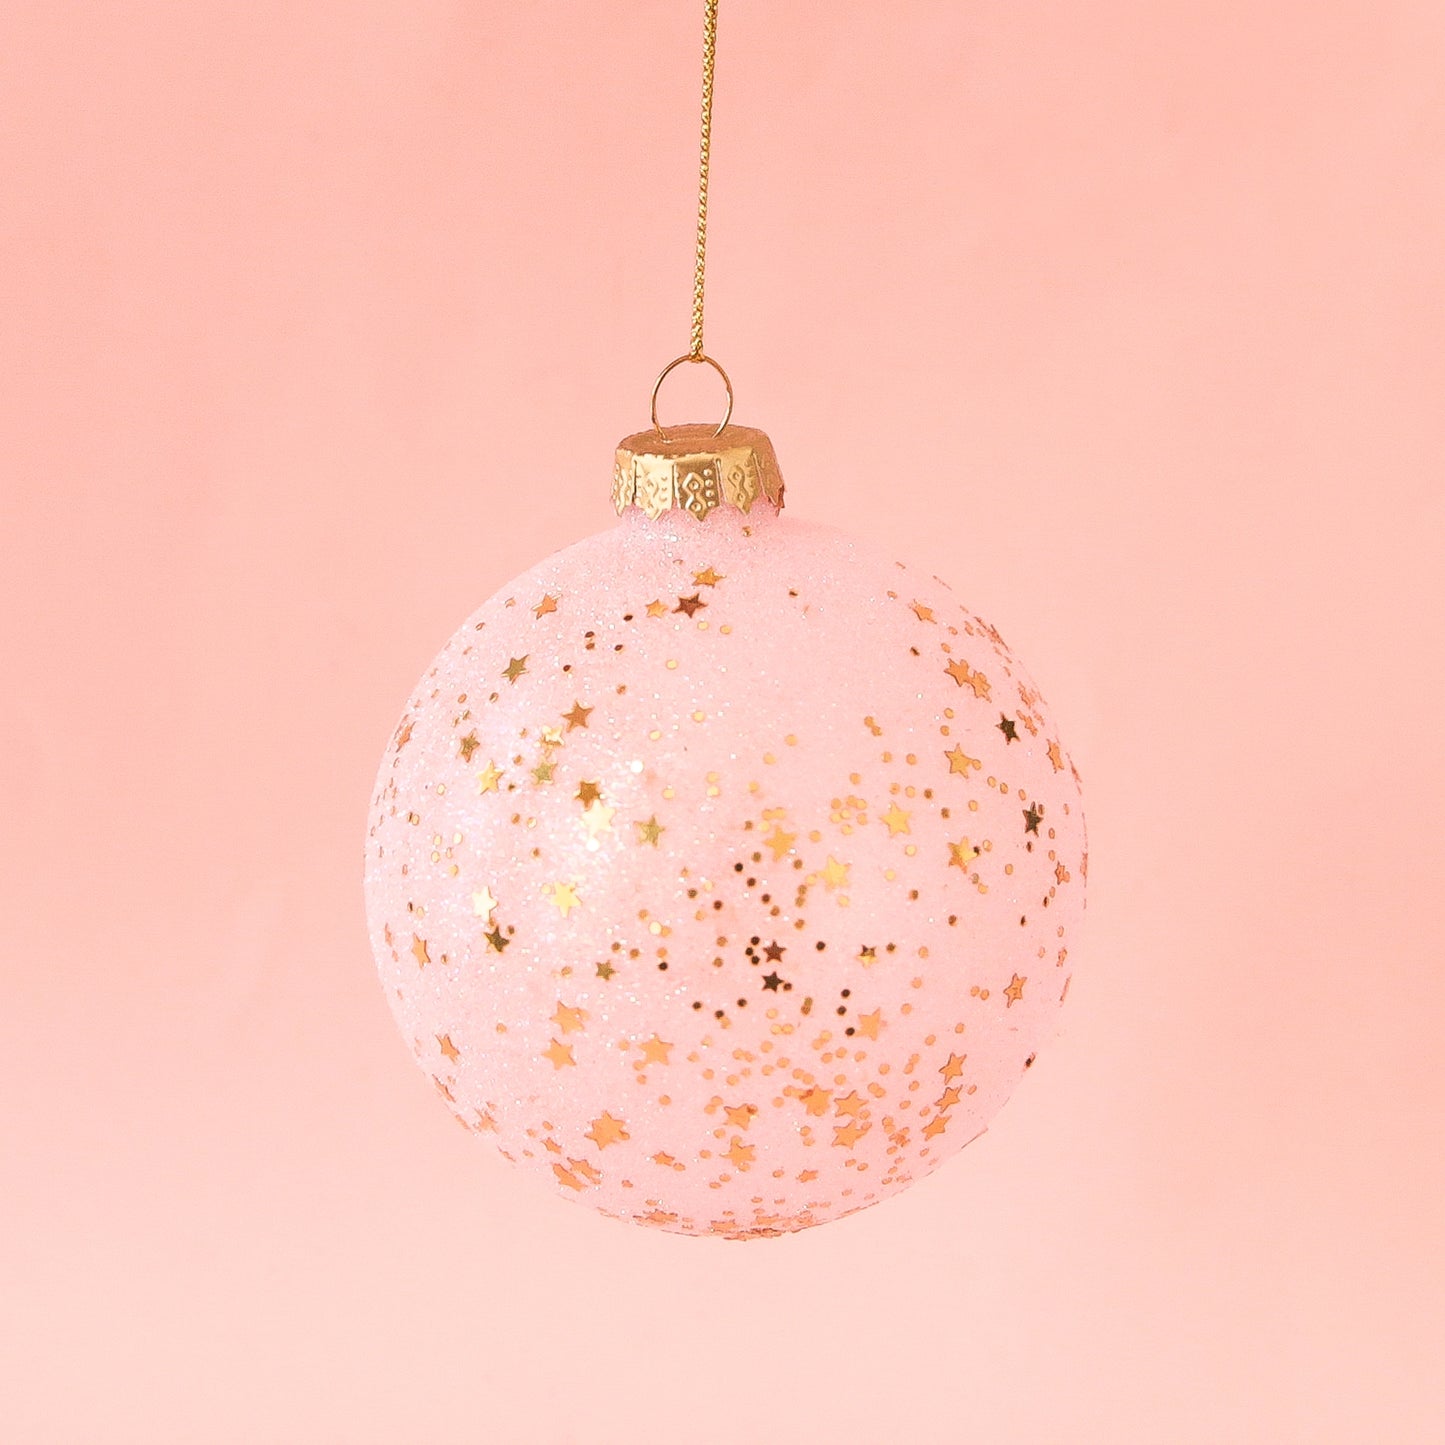 On a peachy background is a light pink ball ornament with small gold stars all over. 